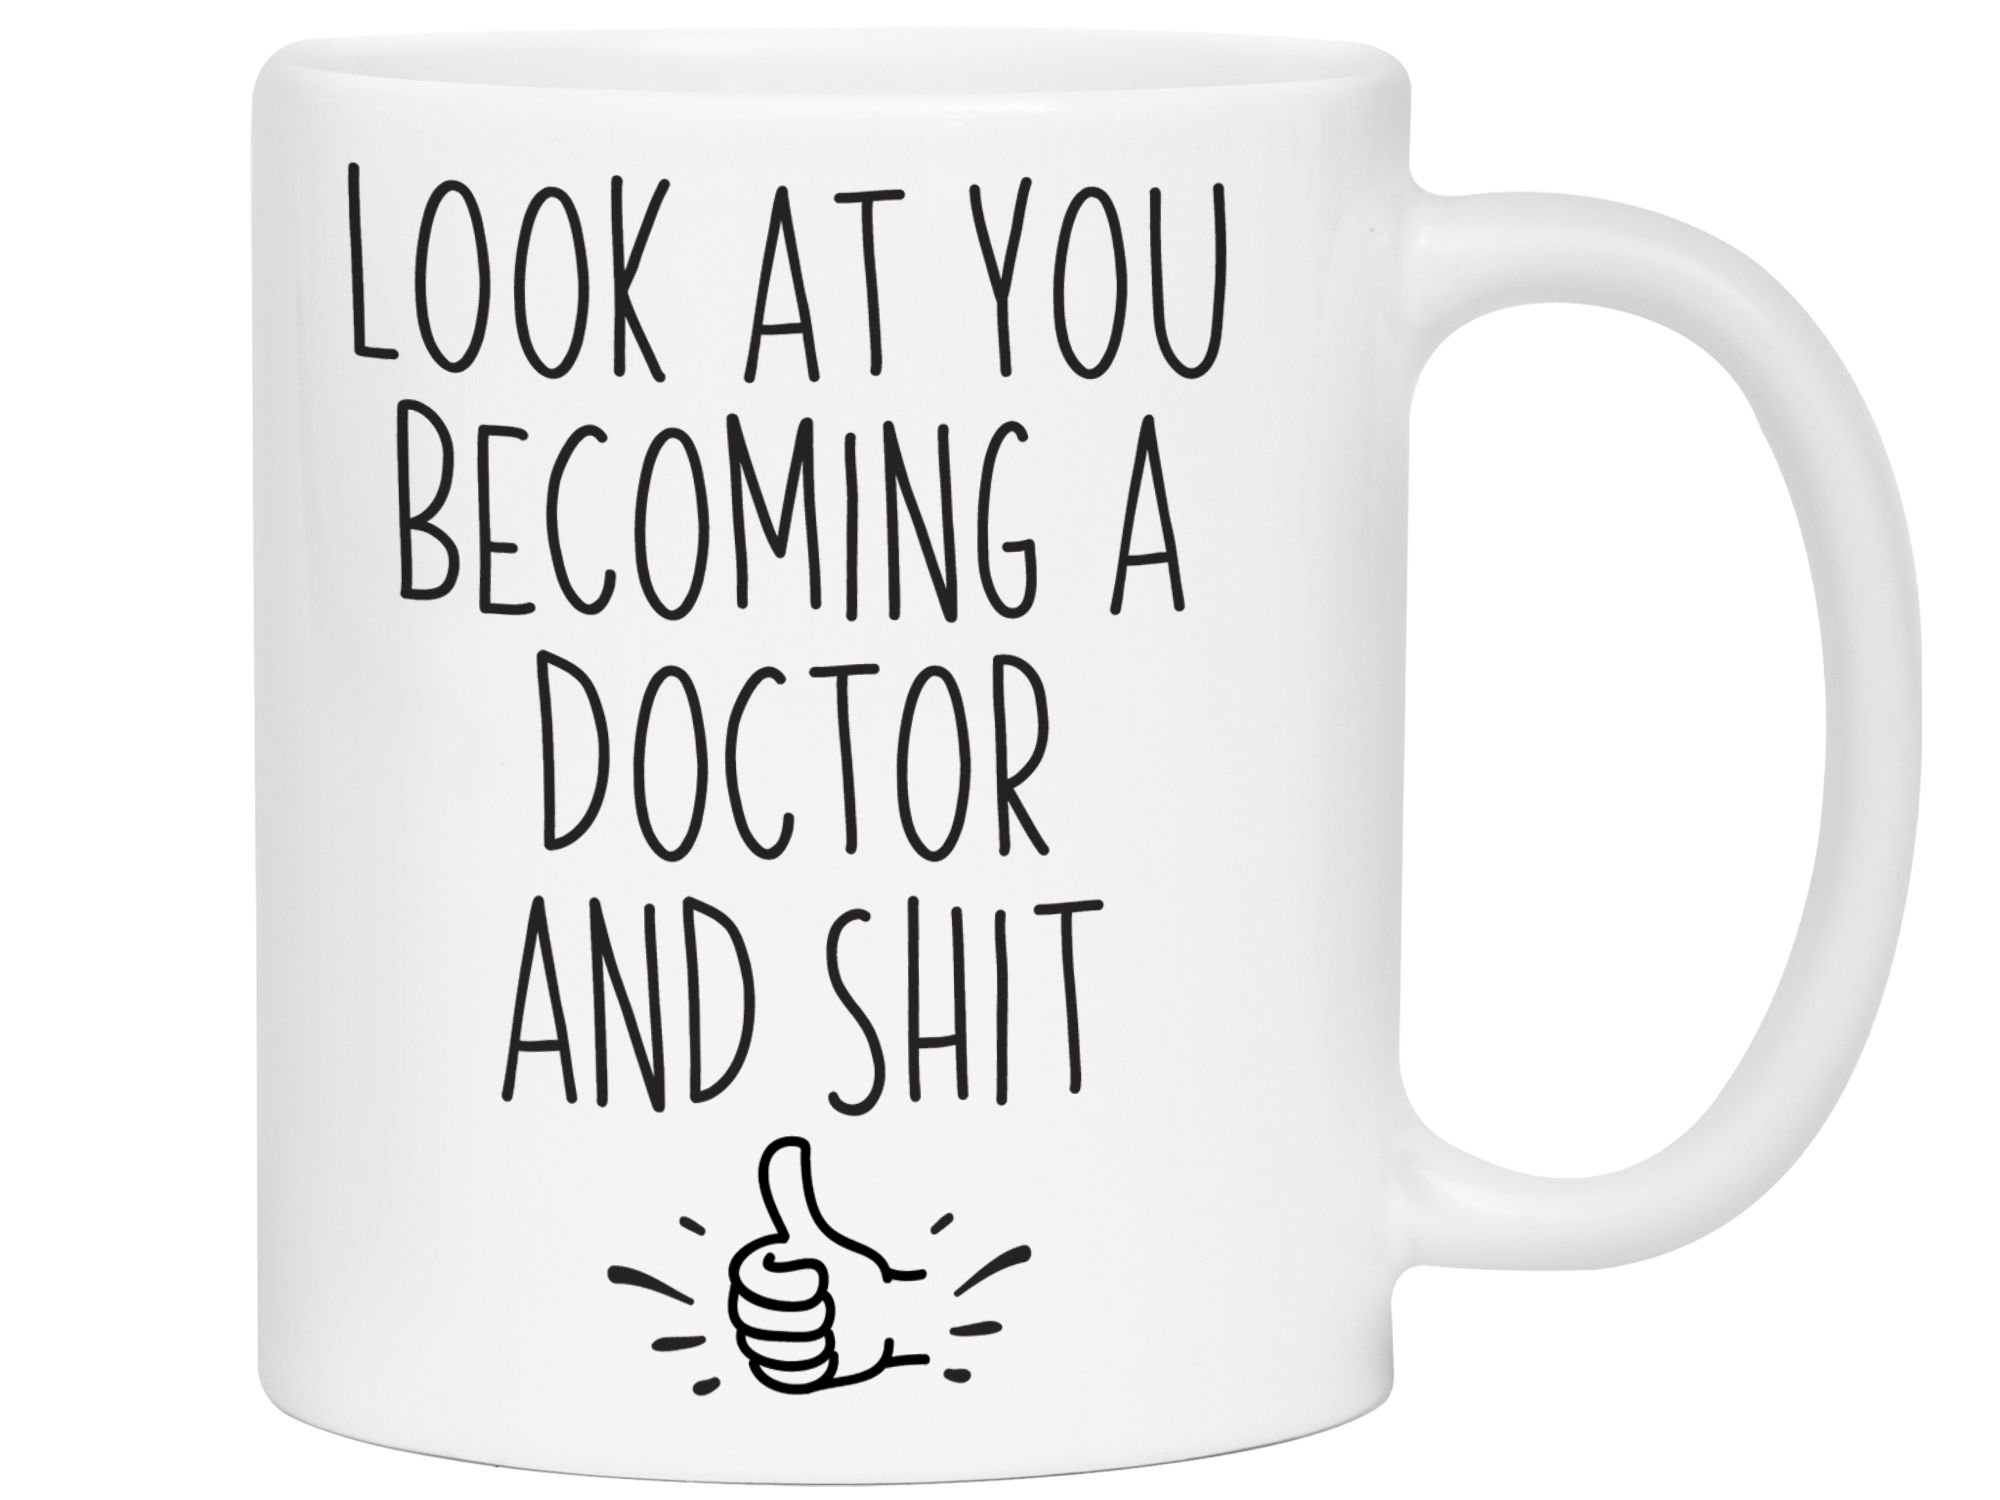 Graduation Gifts for Doctors - Look at You Becoming a Doctor and Shit Funny Coffee Mug